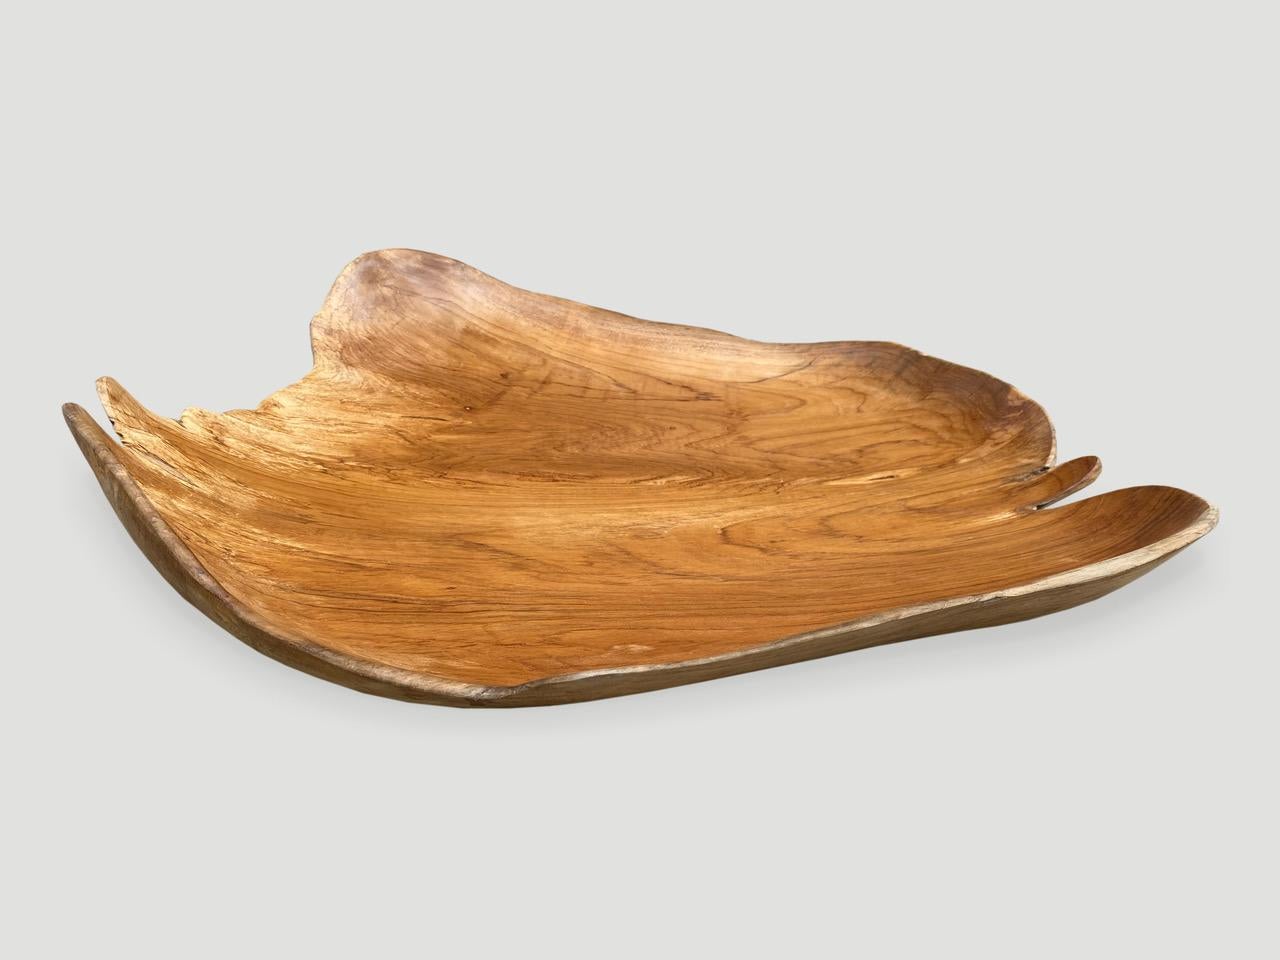 Beautiful grain on this minimalist teak bowl, hand carved from a single piece of reclaimed teak wood.

This bowl or tray was sourced in the spirit of wabi-sabi, a Japanese philosophy that beauty can be found in imperfection and impermanence. It is